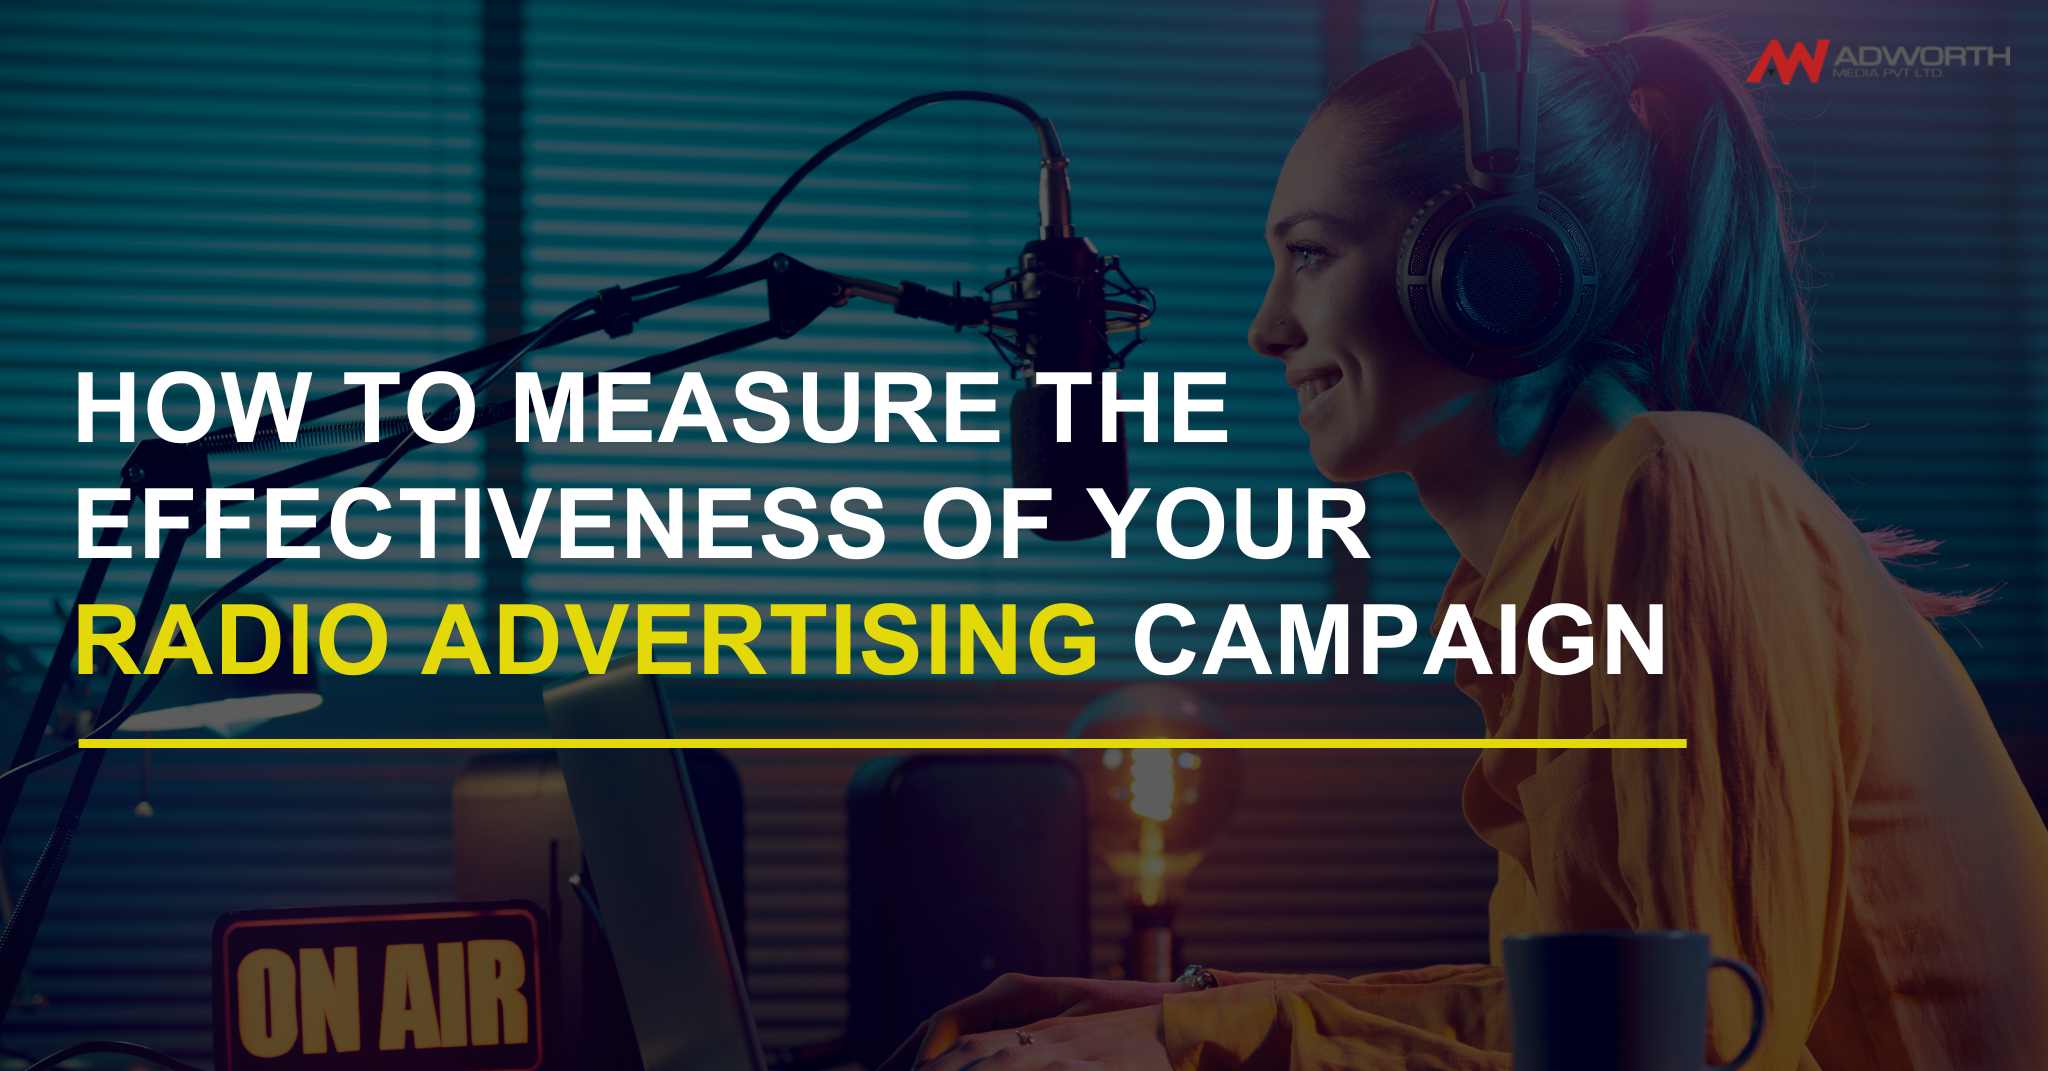 How to Measure the Effectiveness of Your Radio Advertising Campaign